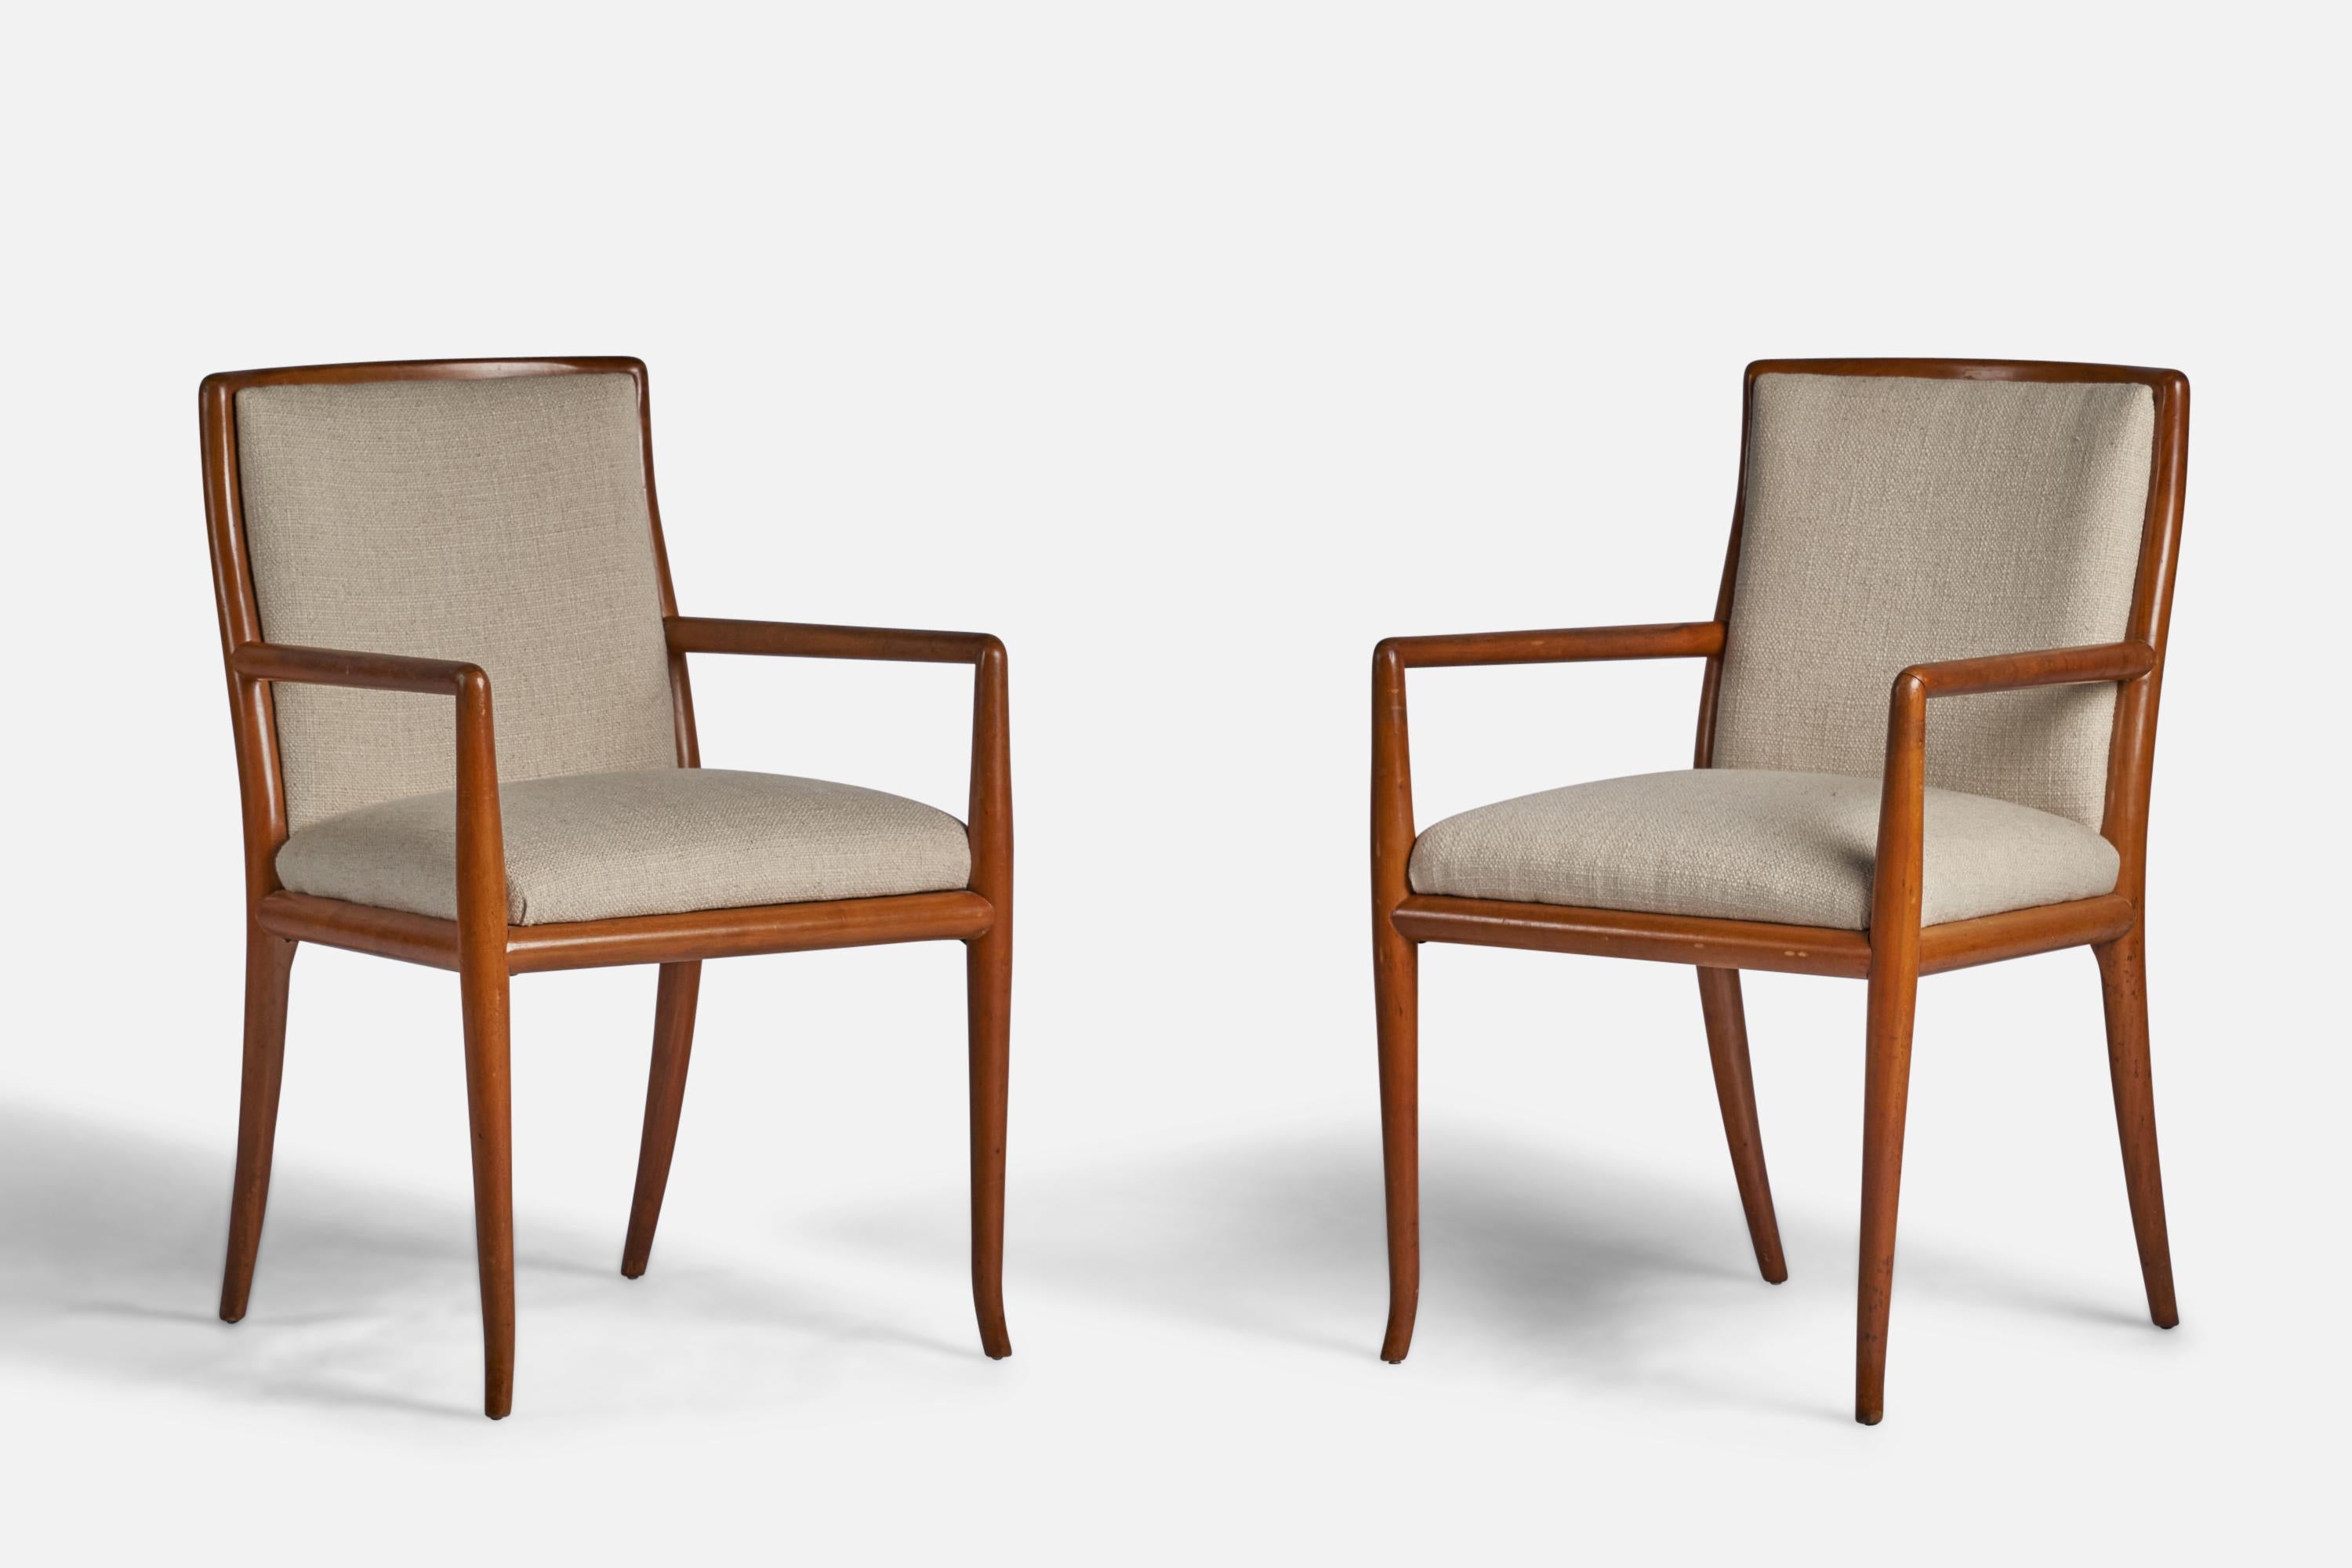 A pair of walnut and off-white fabric armchairs or side chairs designed by T.H. Robsjohn-Gibbings and produced by Widdicomb, Grand Rapids, Michigan, USA, 1950s.
20” seat height